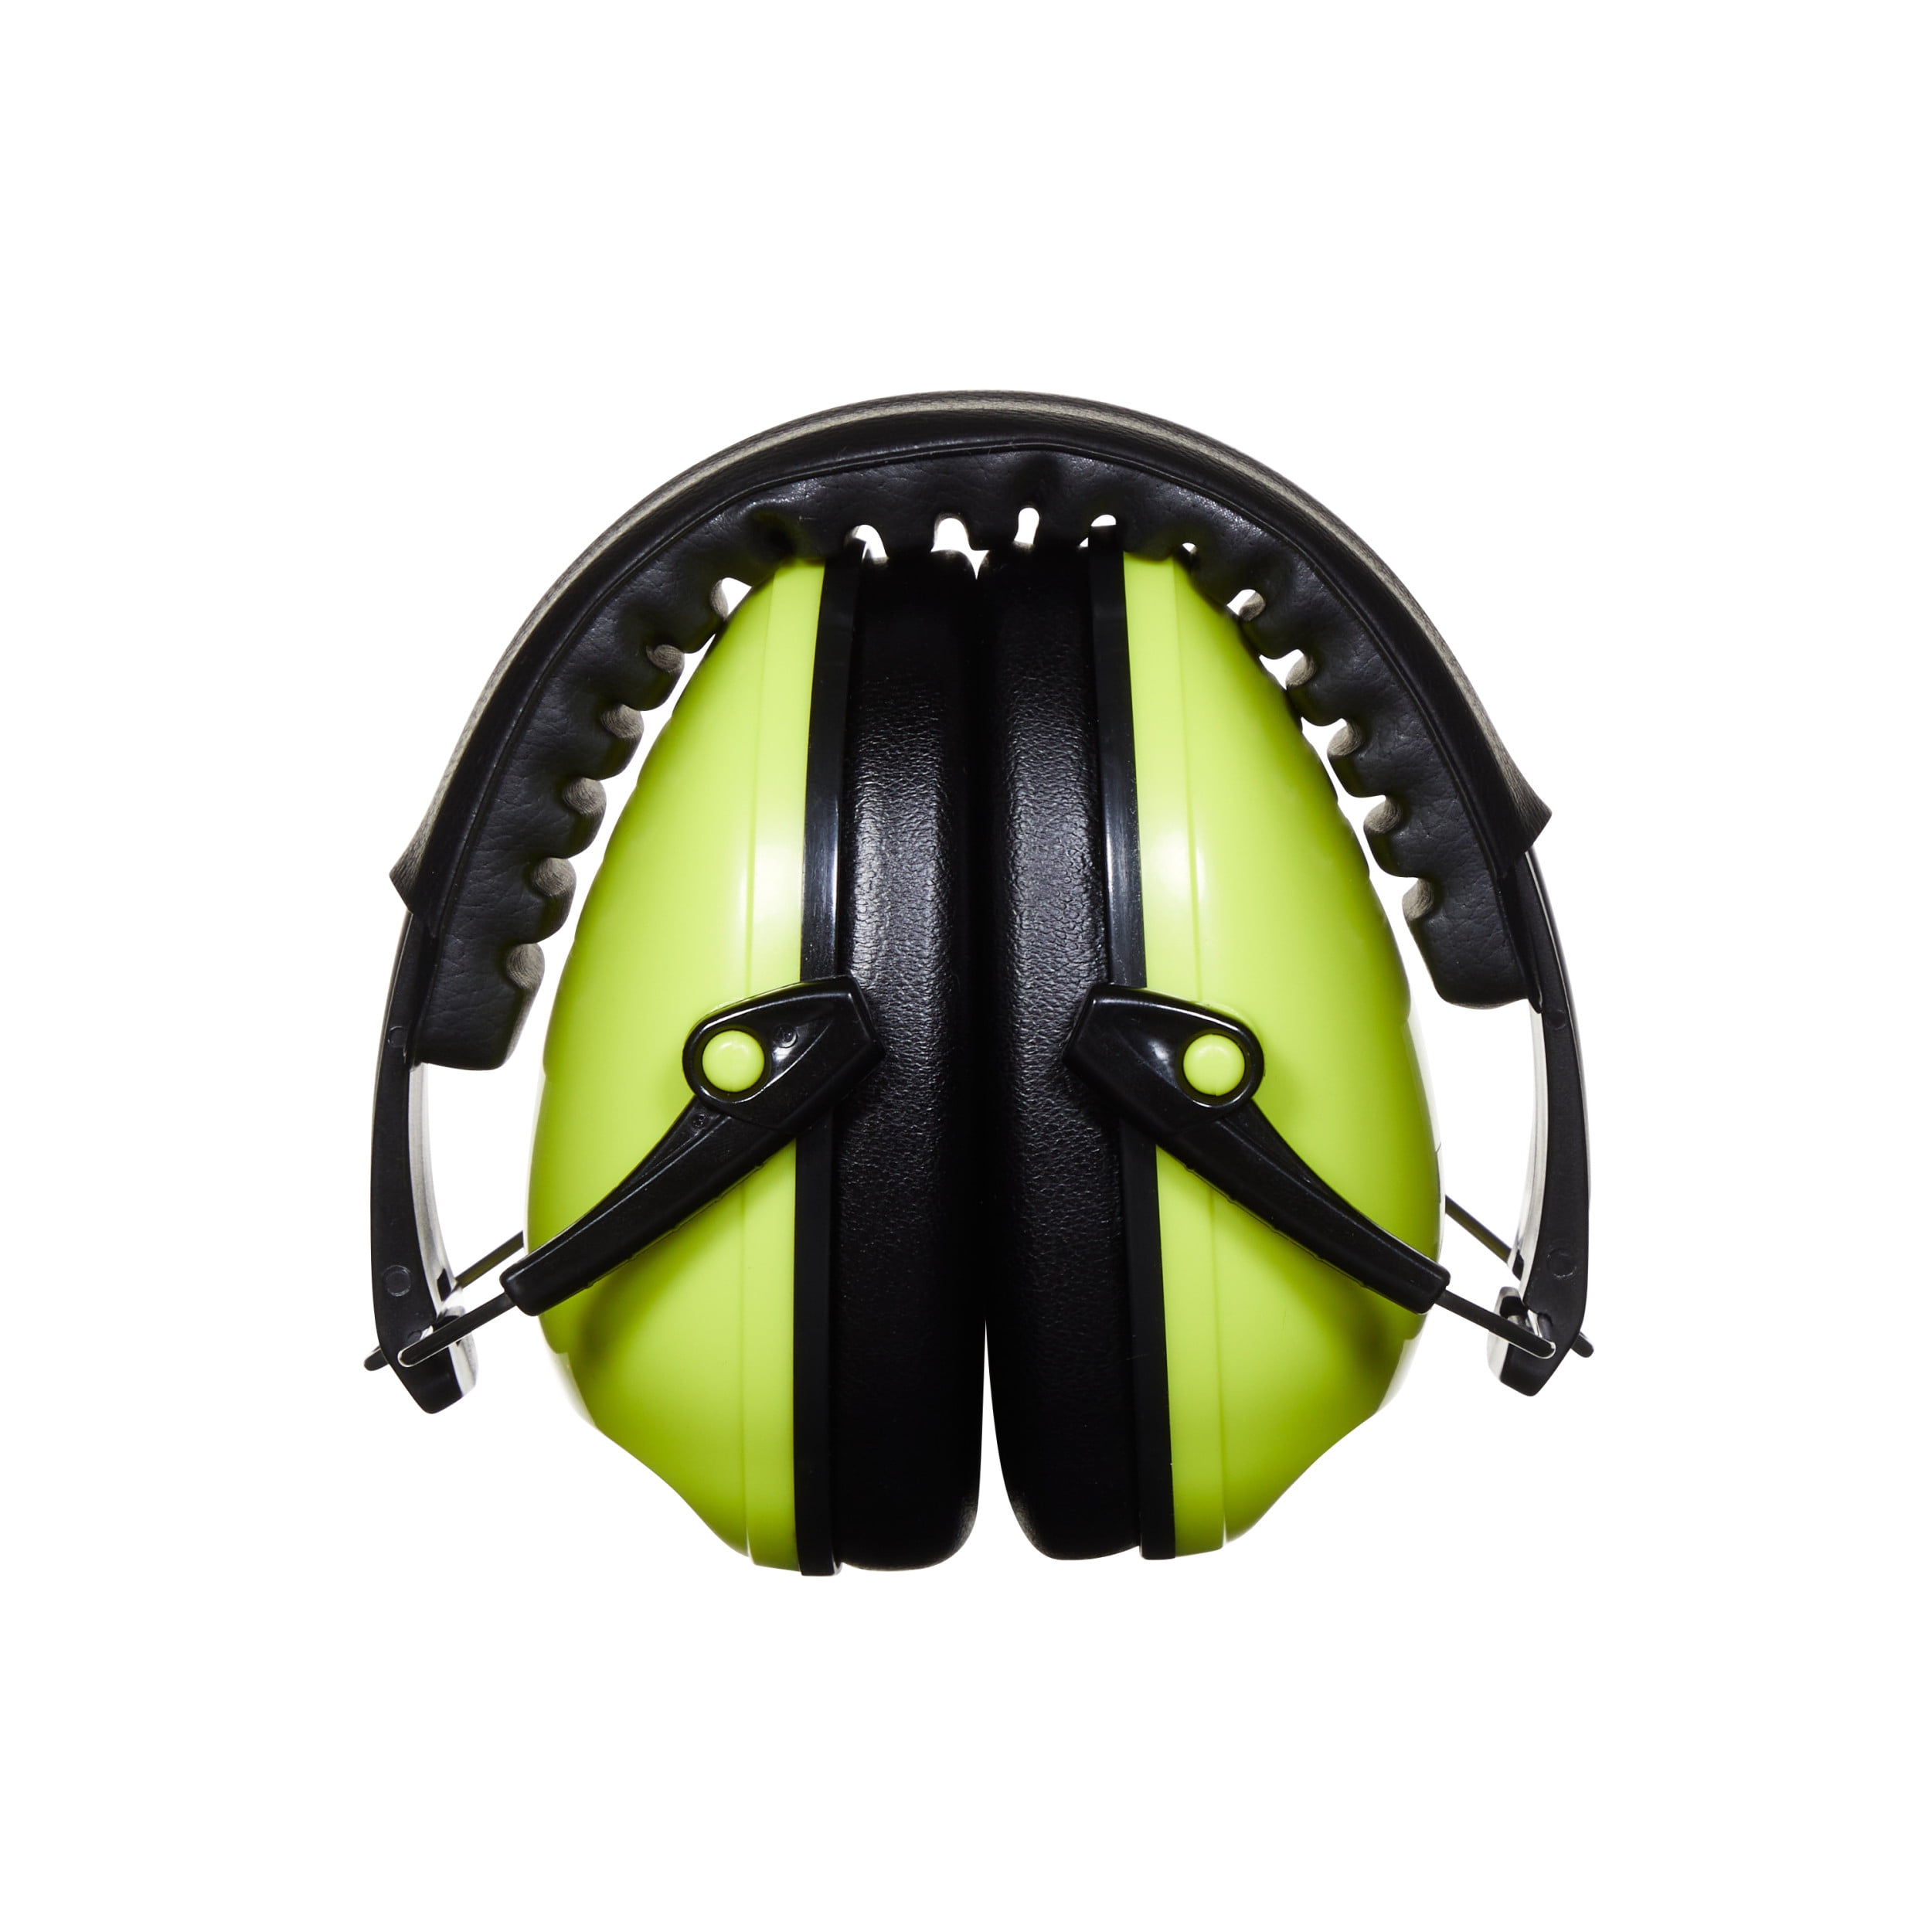 Silverline 315357 Junior Ear Defenders Up to Age 7 